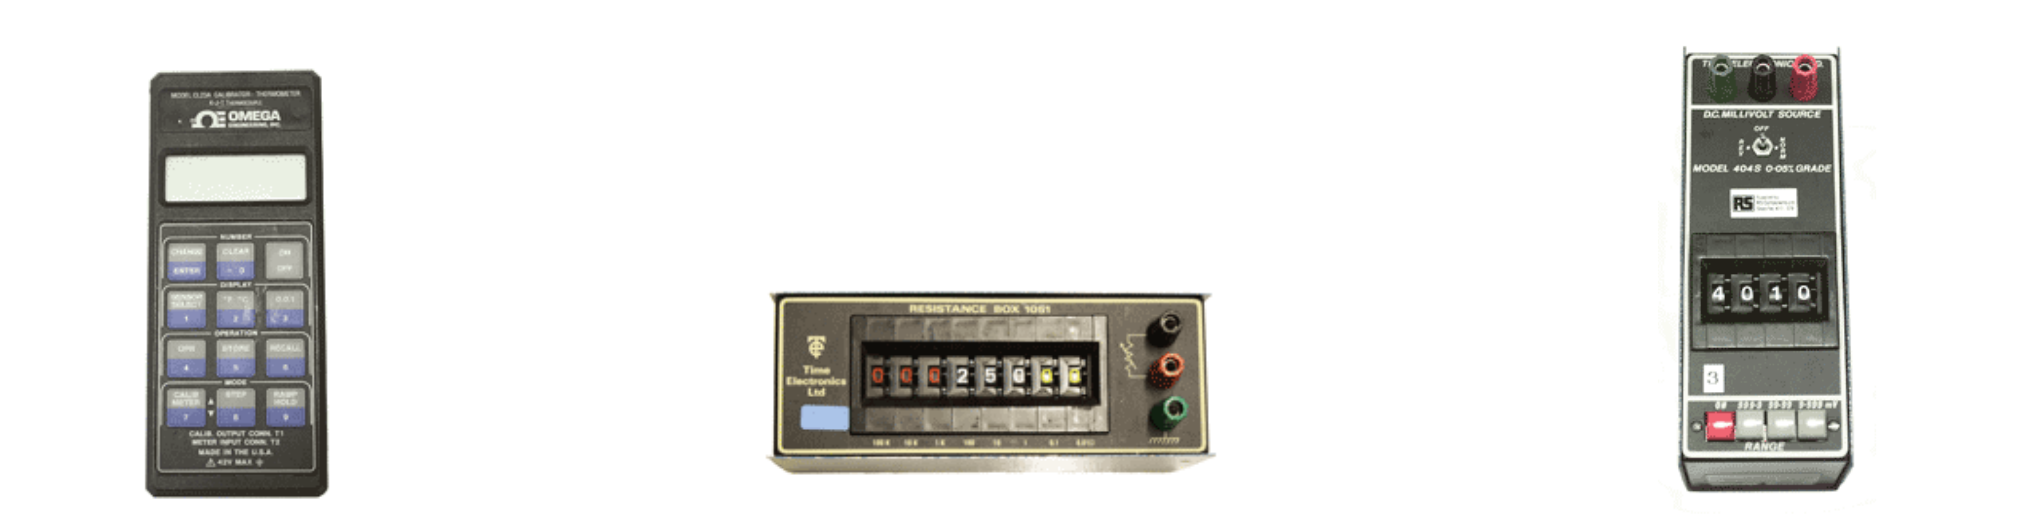 Thermocouple calibrators and decade resistance boxes